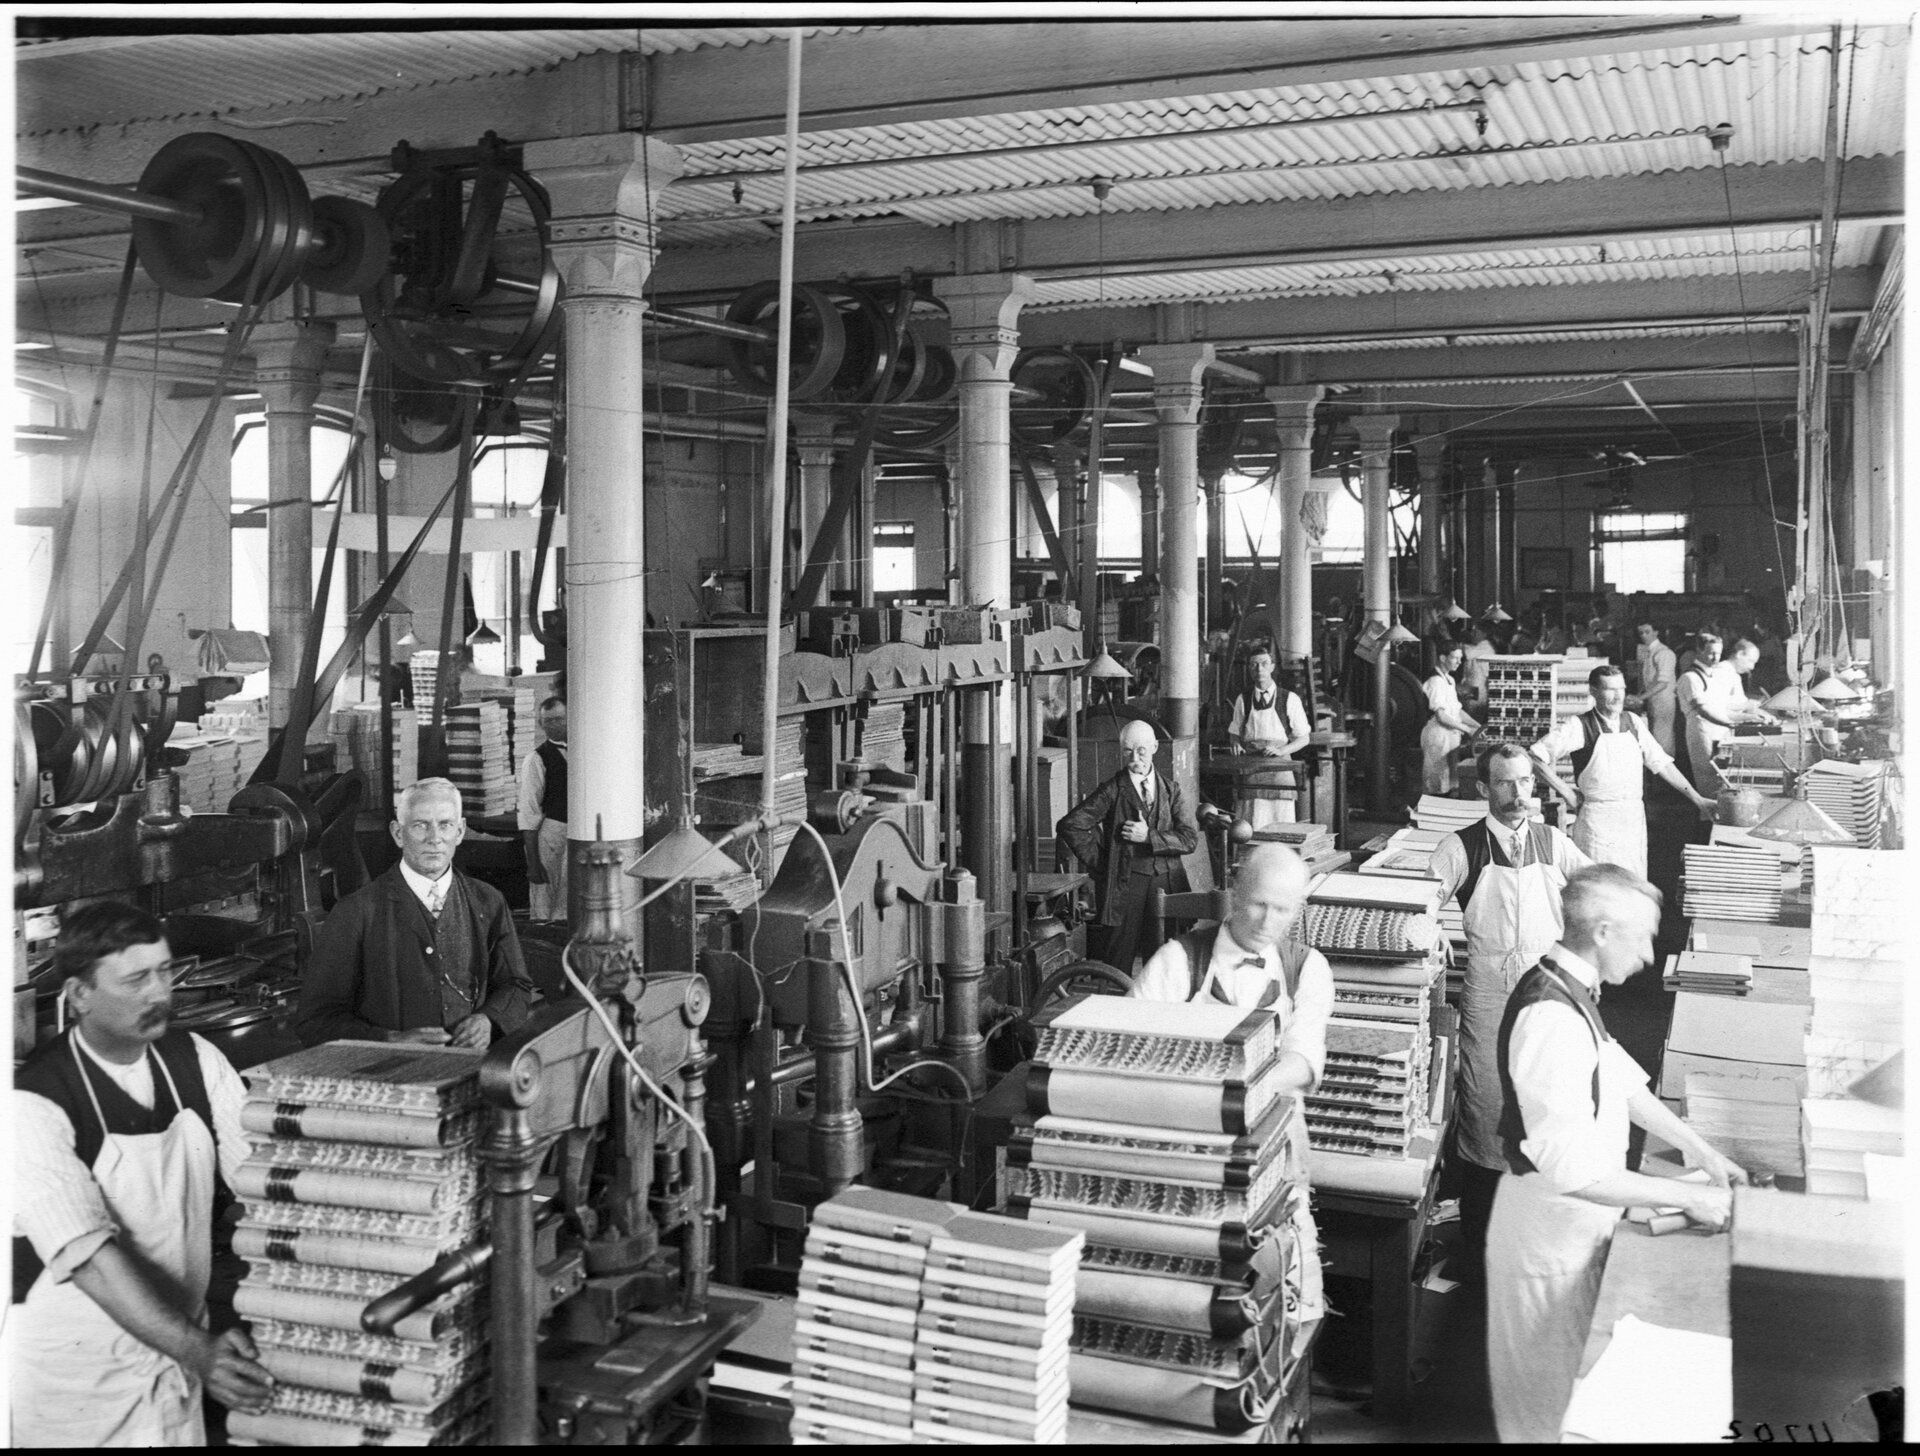 Men stand in a workshop behind stacks of large hardcover books